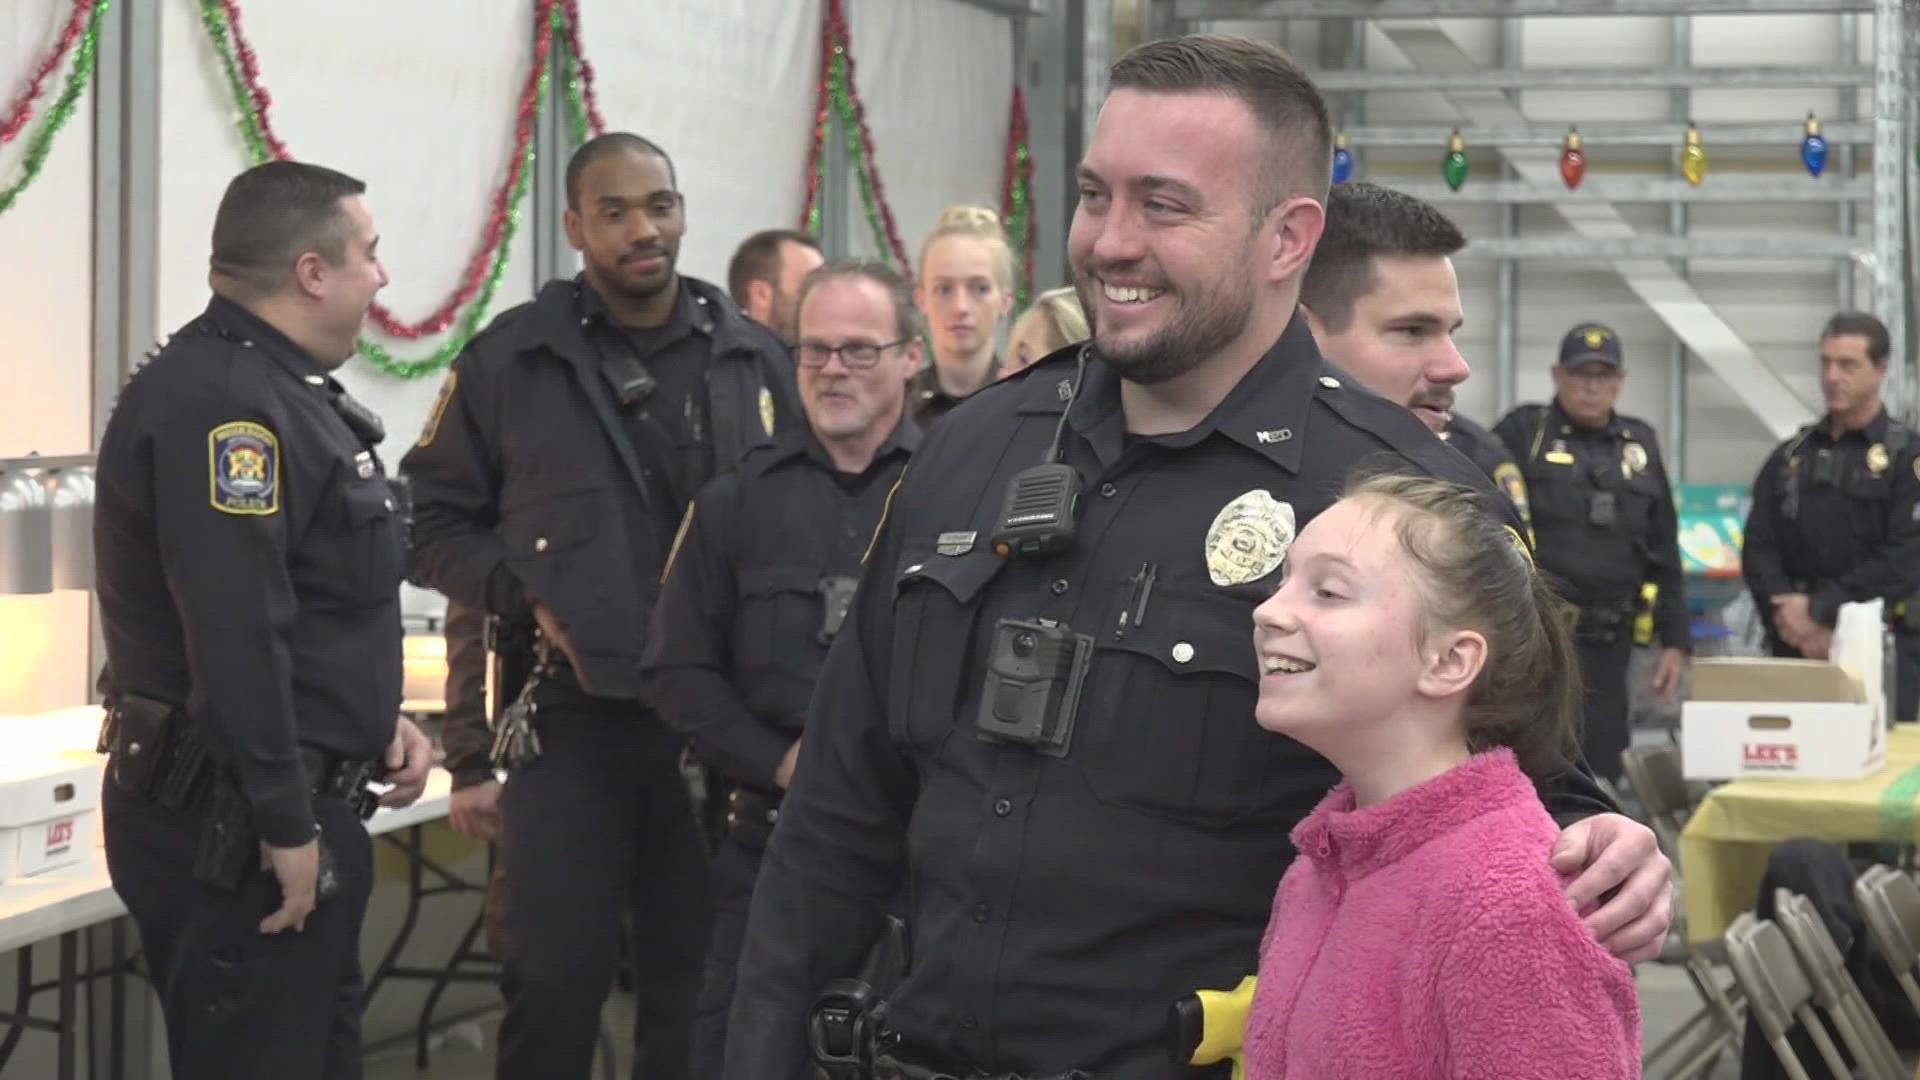 Law enforcement from all over Muskegon County came together for the Shop with a Cop charity event. This event helps sponsor 50 Muskegon area children in need.